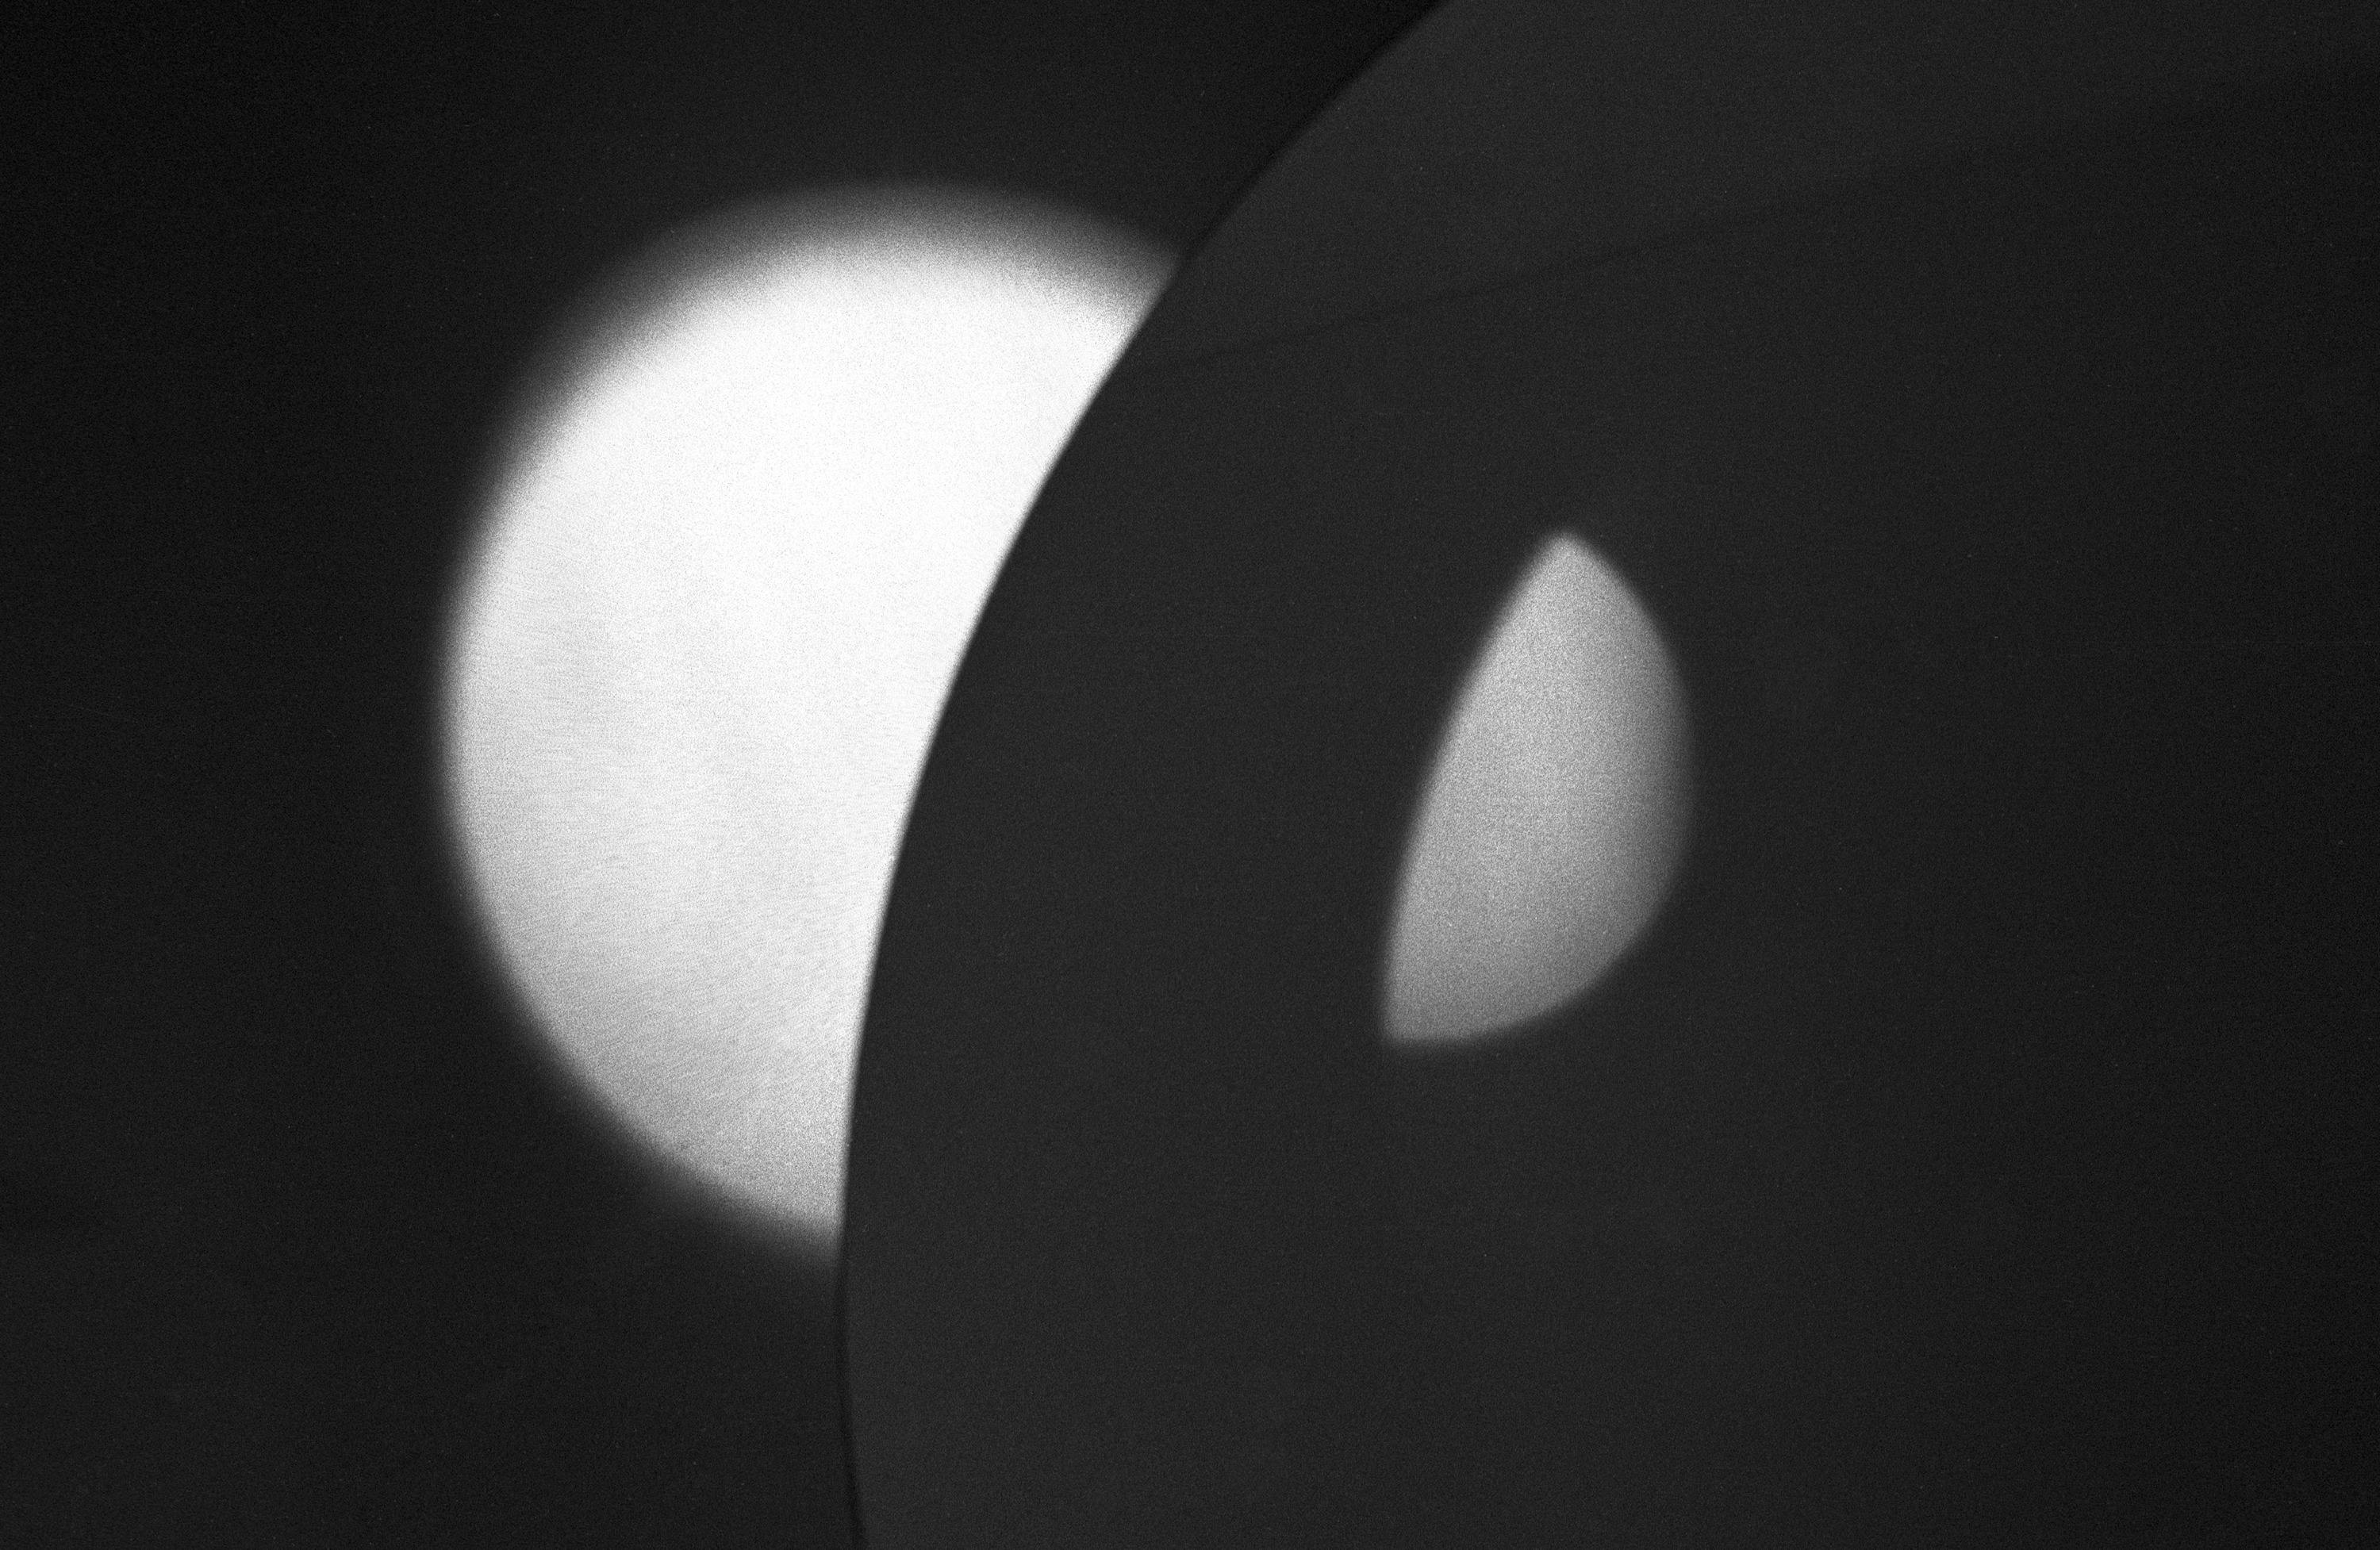 An abstract black and white image depicting two semi circles of light on a dark background. 